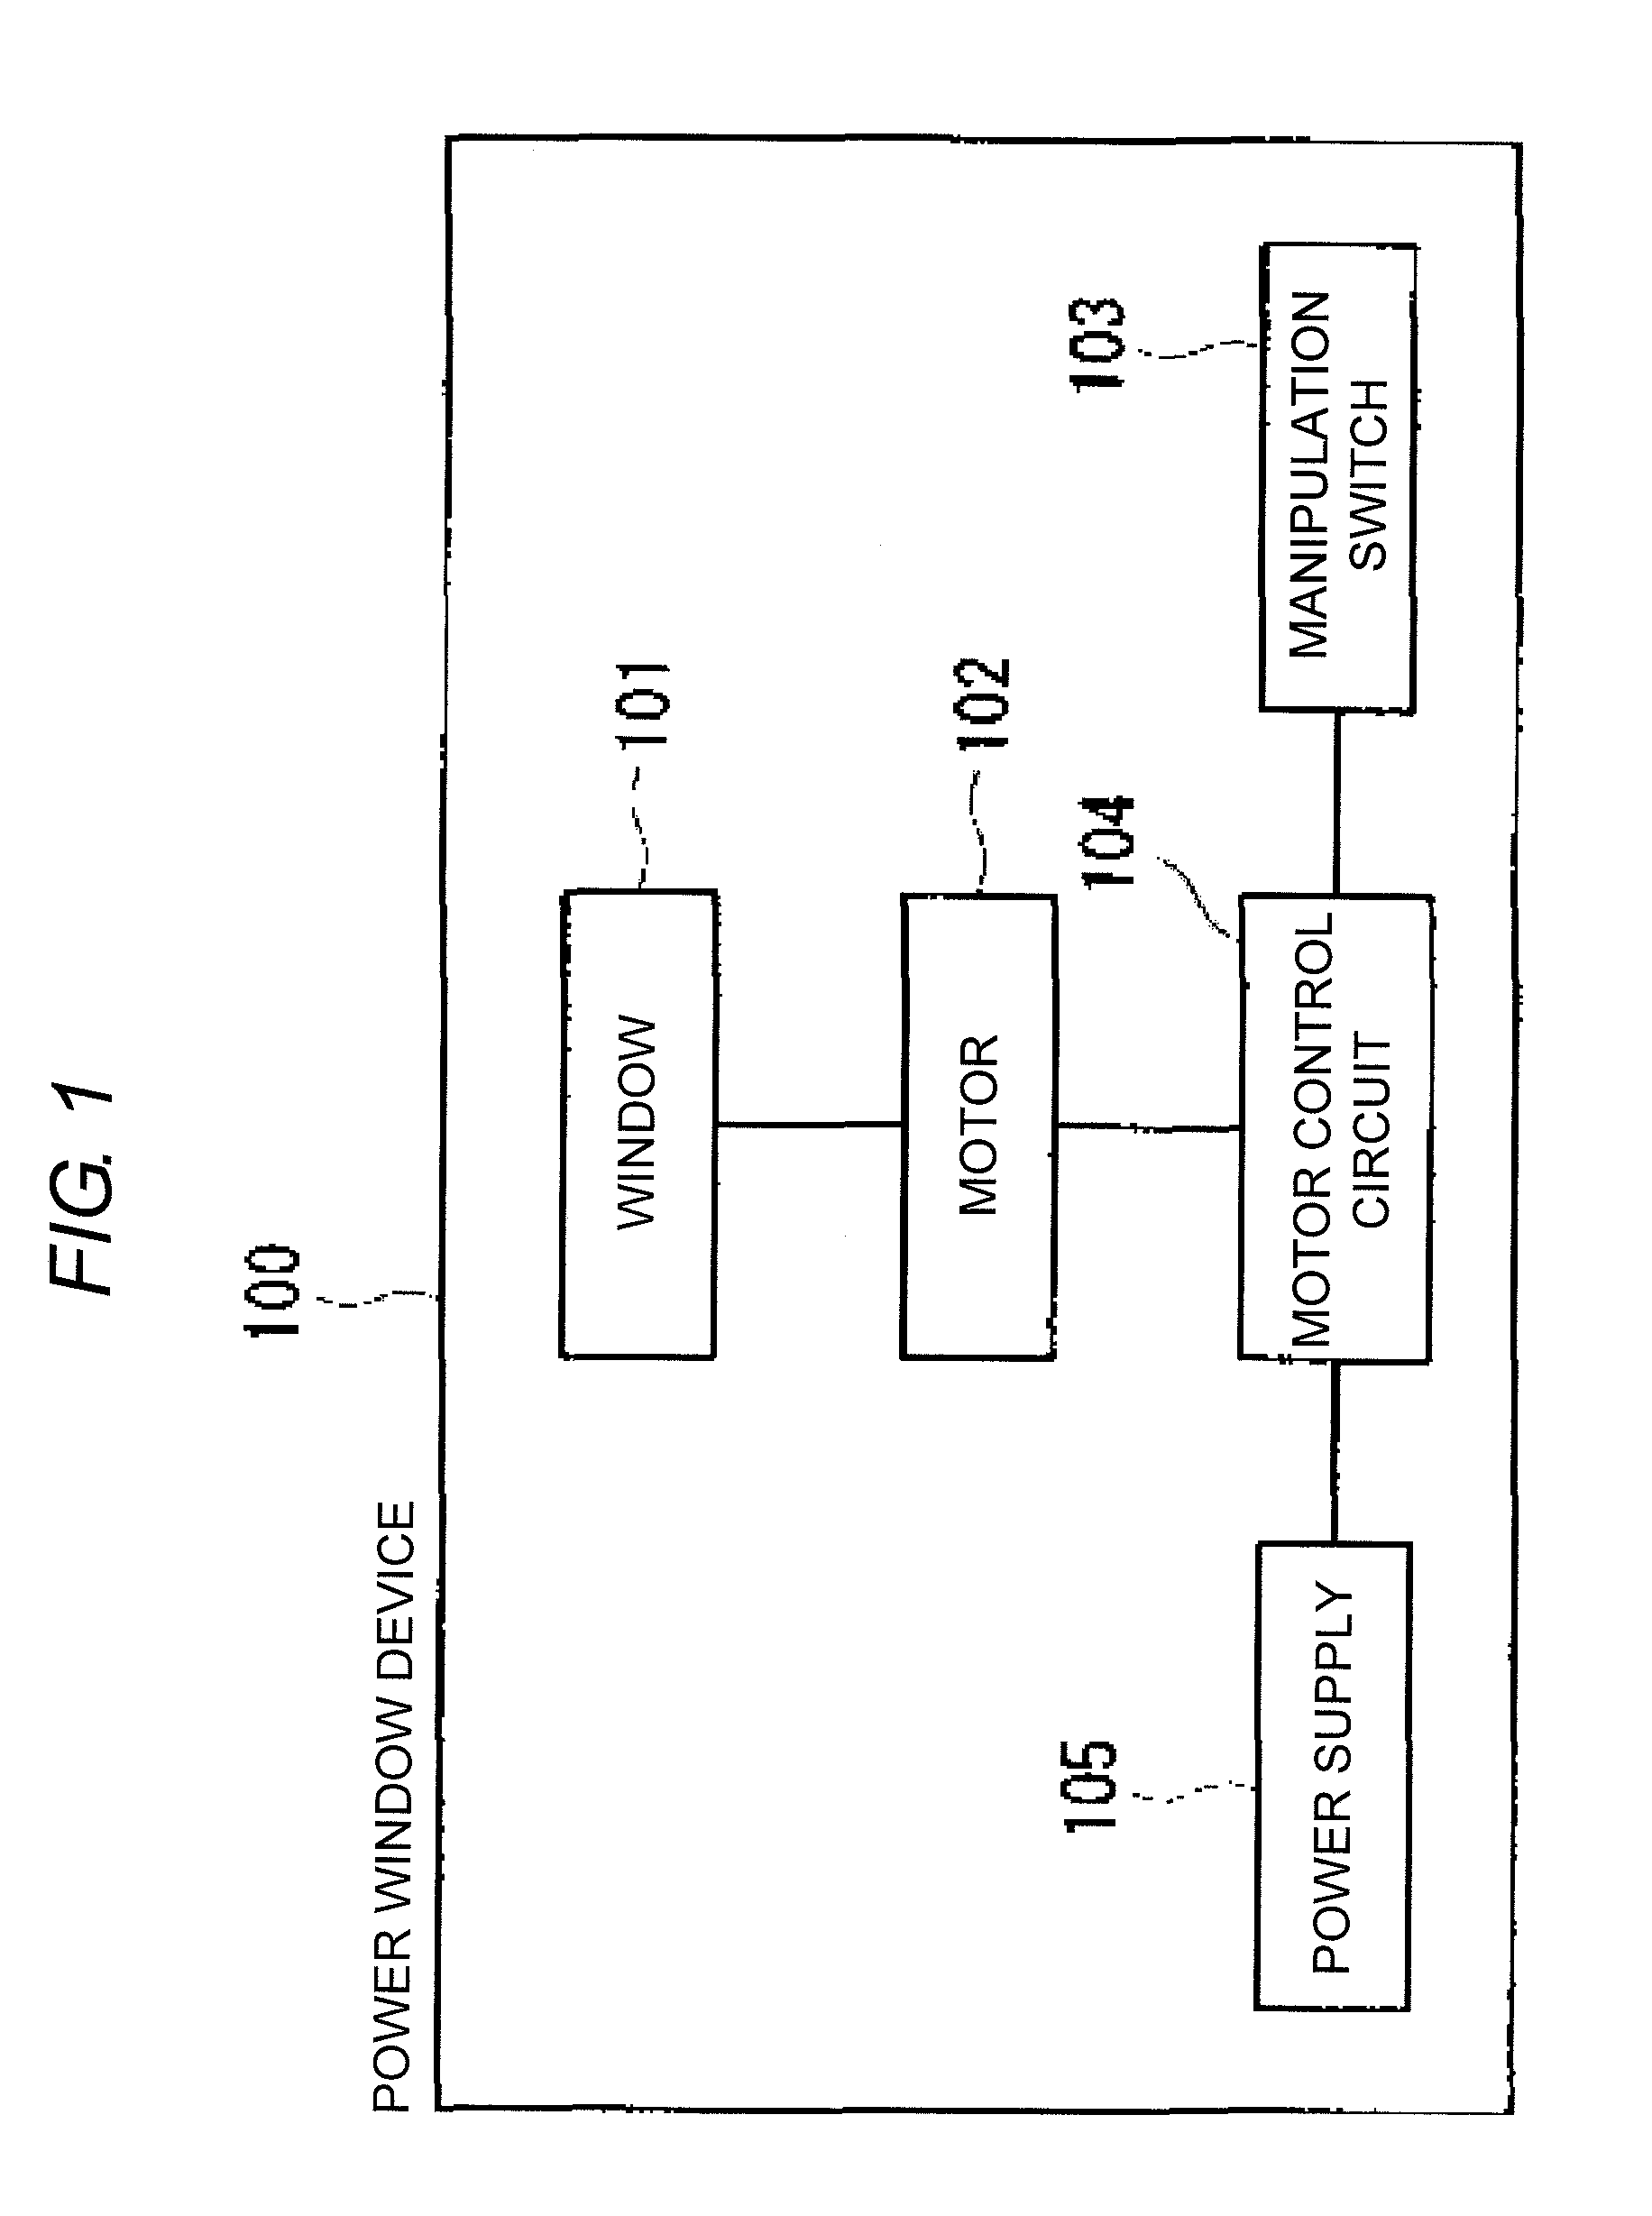 Motor control circuit and power window device